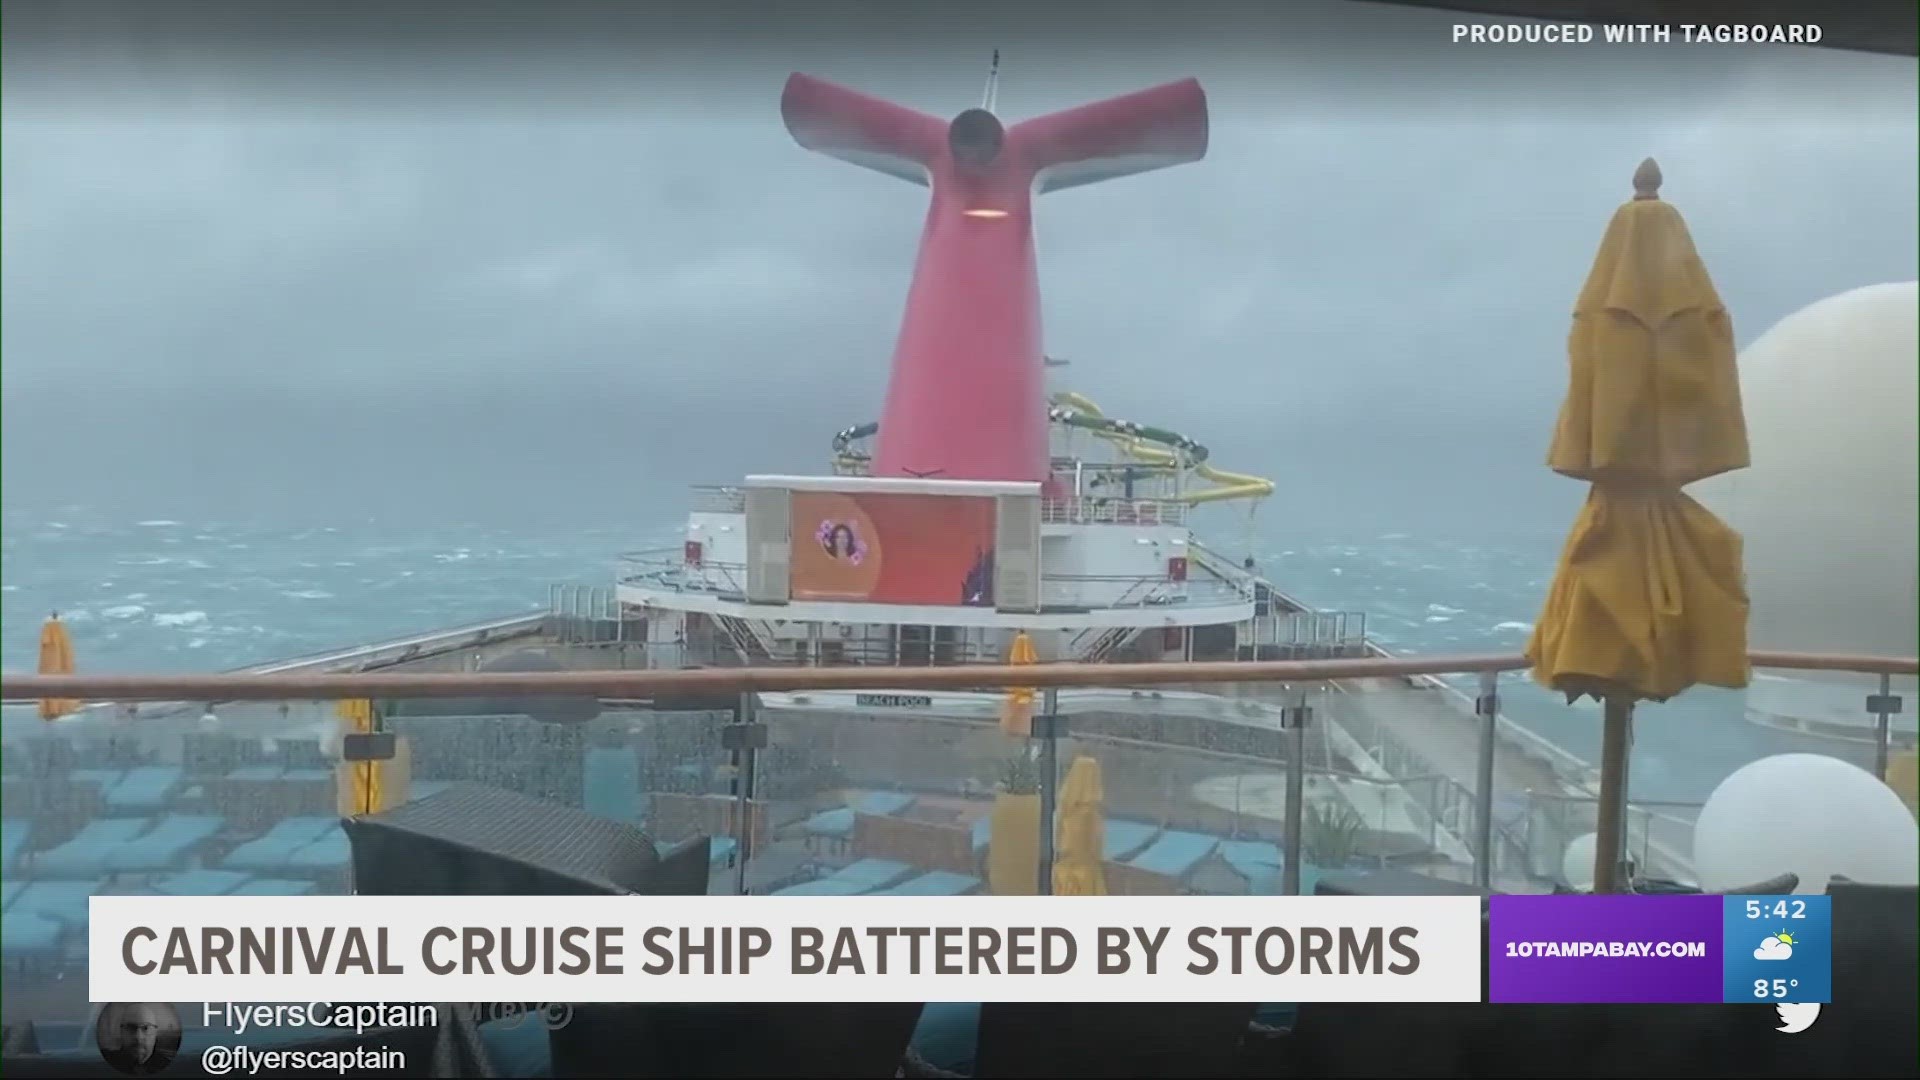 Travelers said they spent the 12 hours waiting to dock getting rocked by huge waves and lashing rain the whole time.